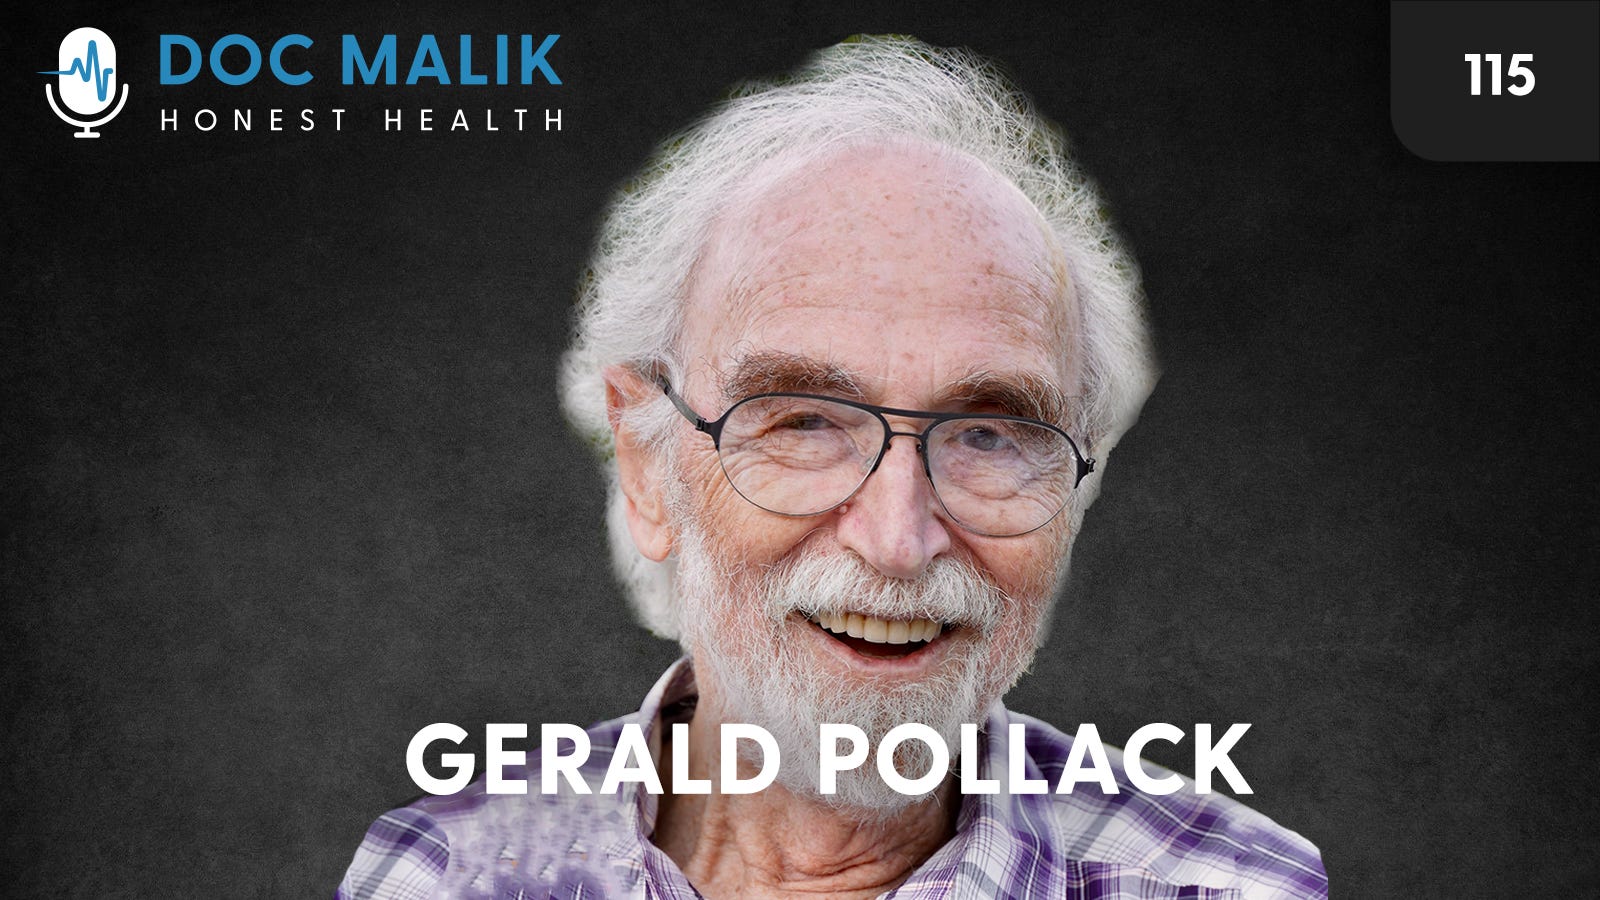 #115 - Gerald Pollack Discusses The Fourth Phase Of Water And How It Impacts Health And Disease